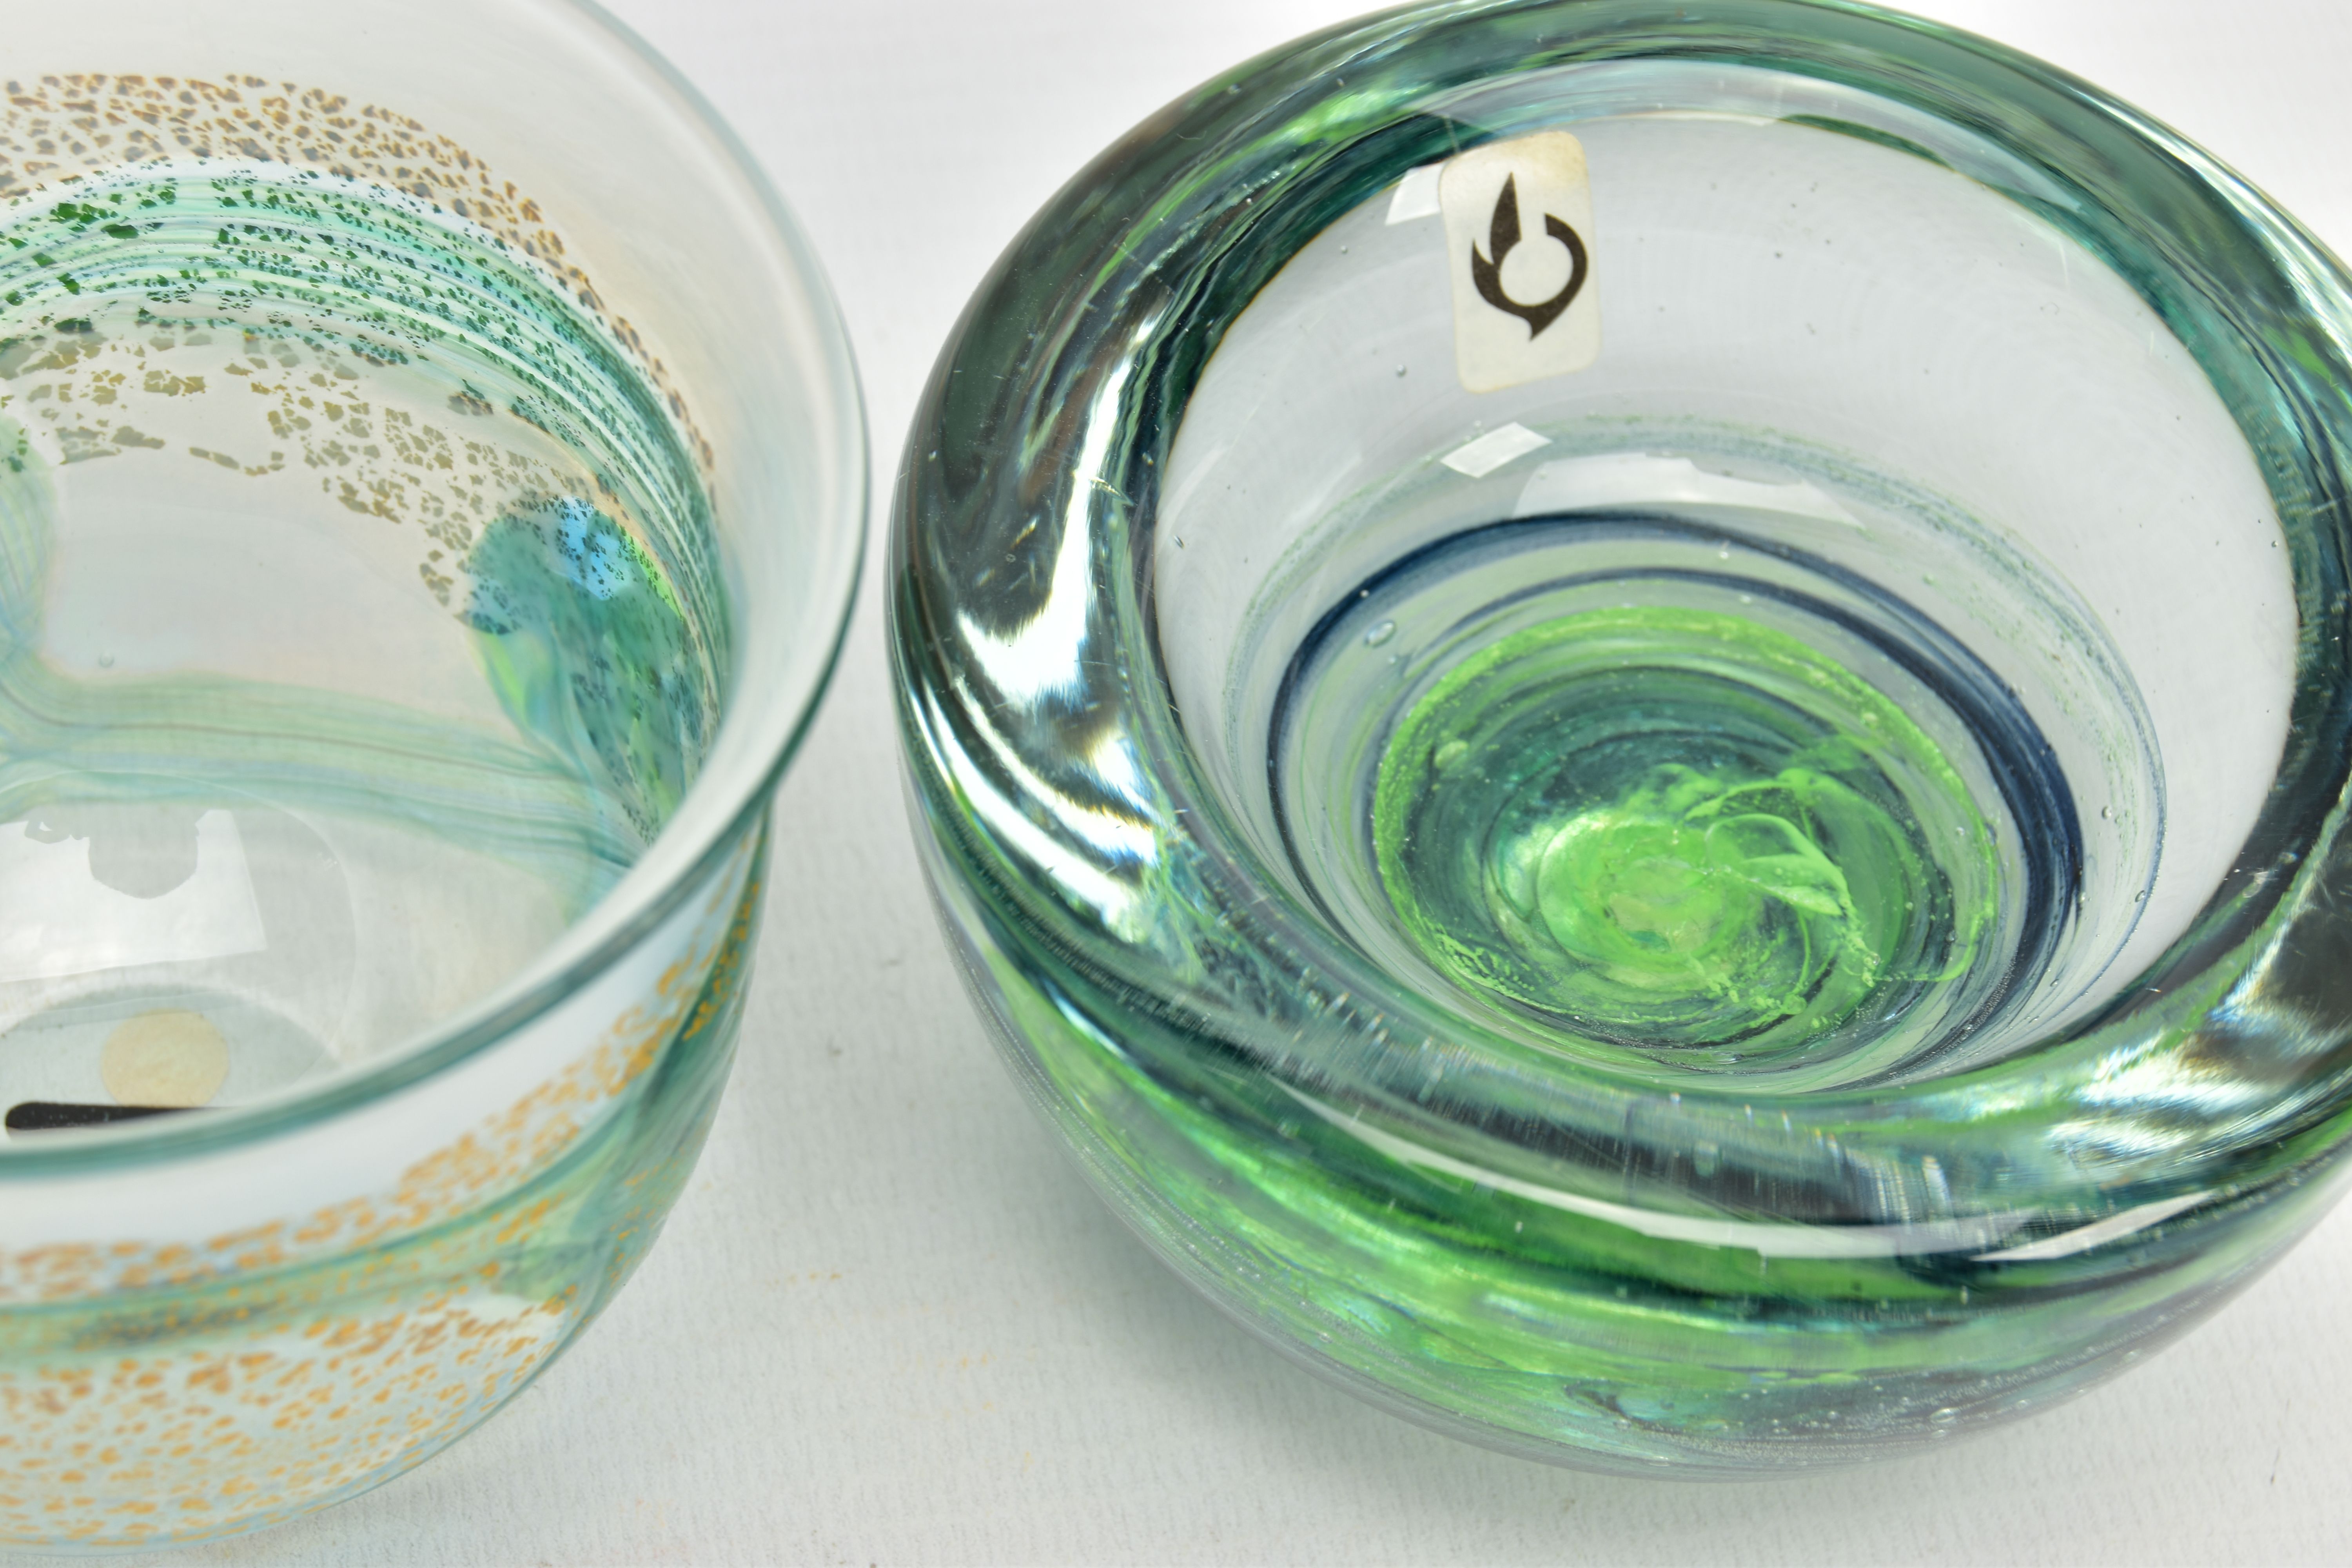 THREE ISLE OF WIGHT STUDIO GLASS BOWLS, the two shorter bowls have impressed marks to the base and - Image 6 of 9